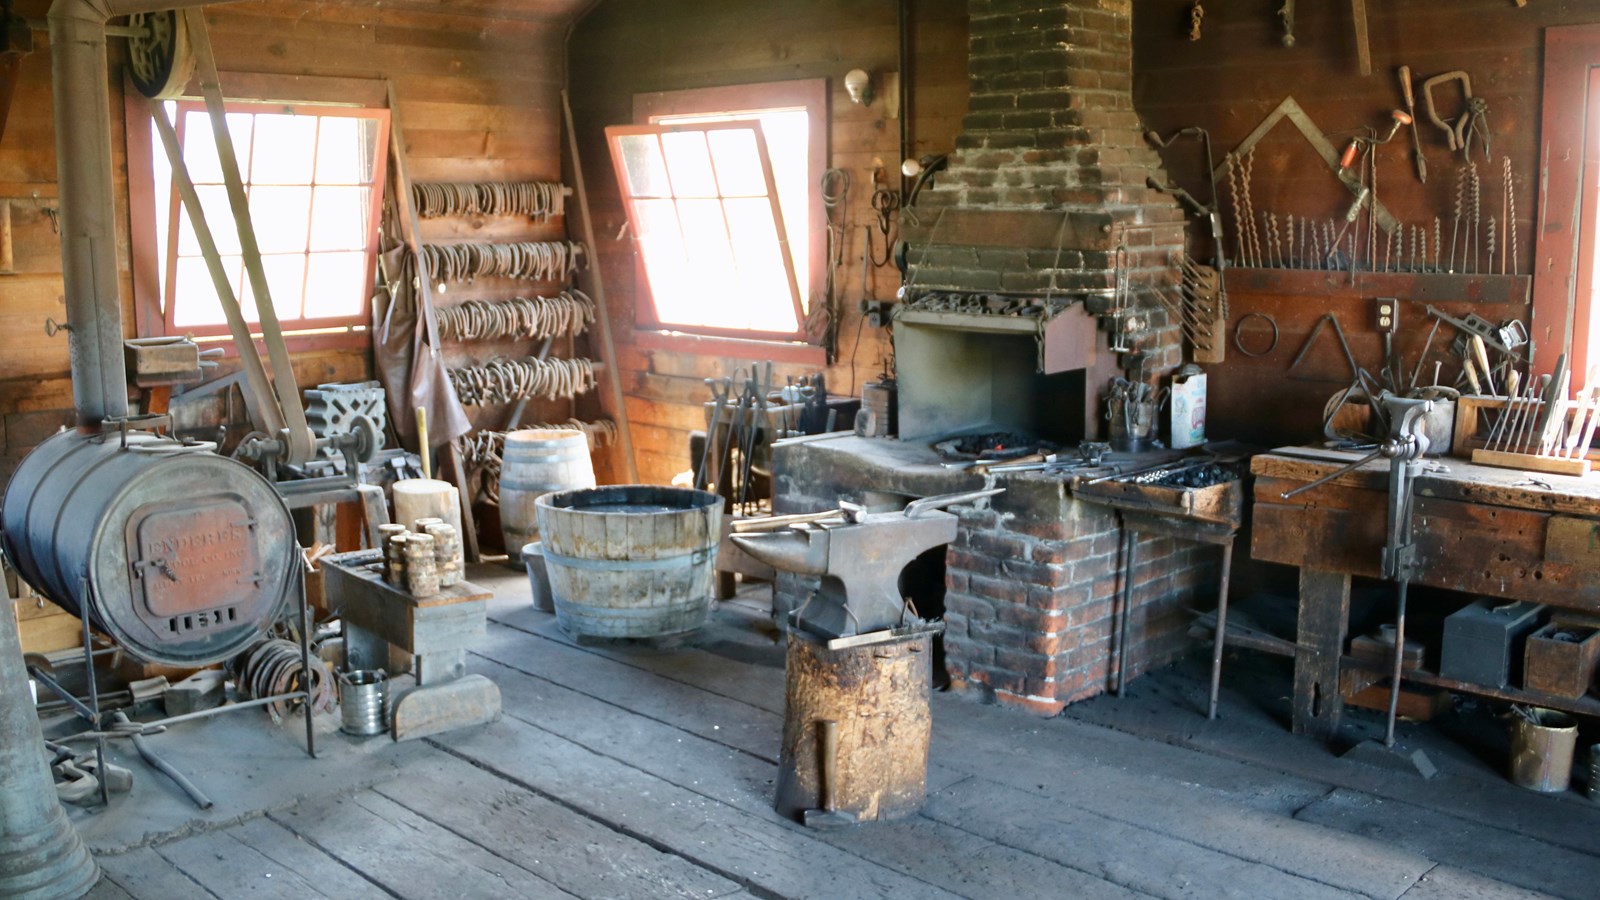 A variety of blacksmithing and carpentry tools on display inside the historic ranch repair shop.